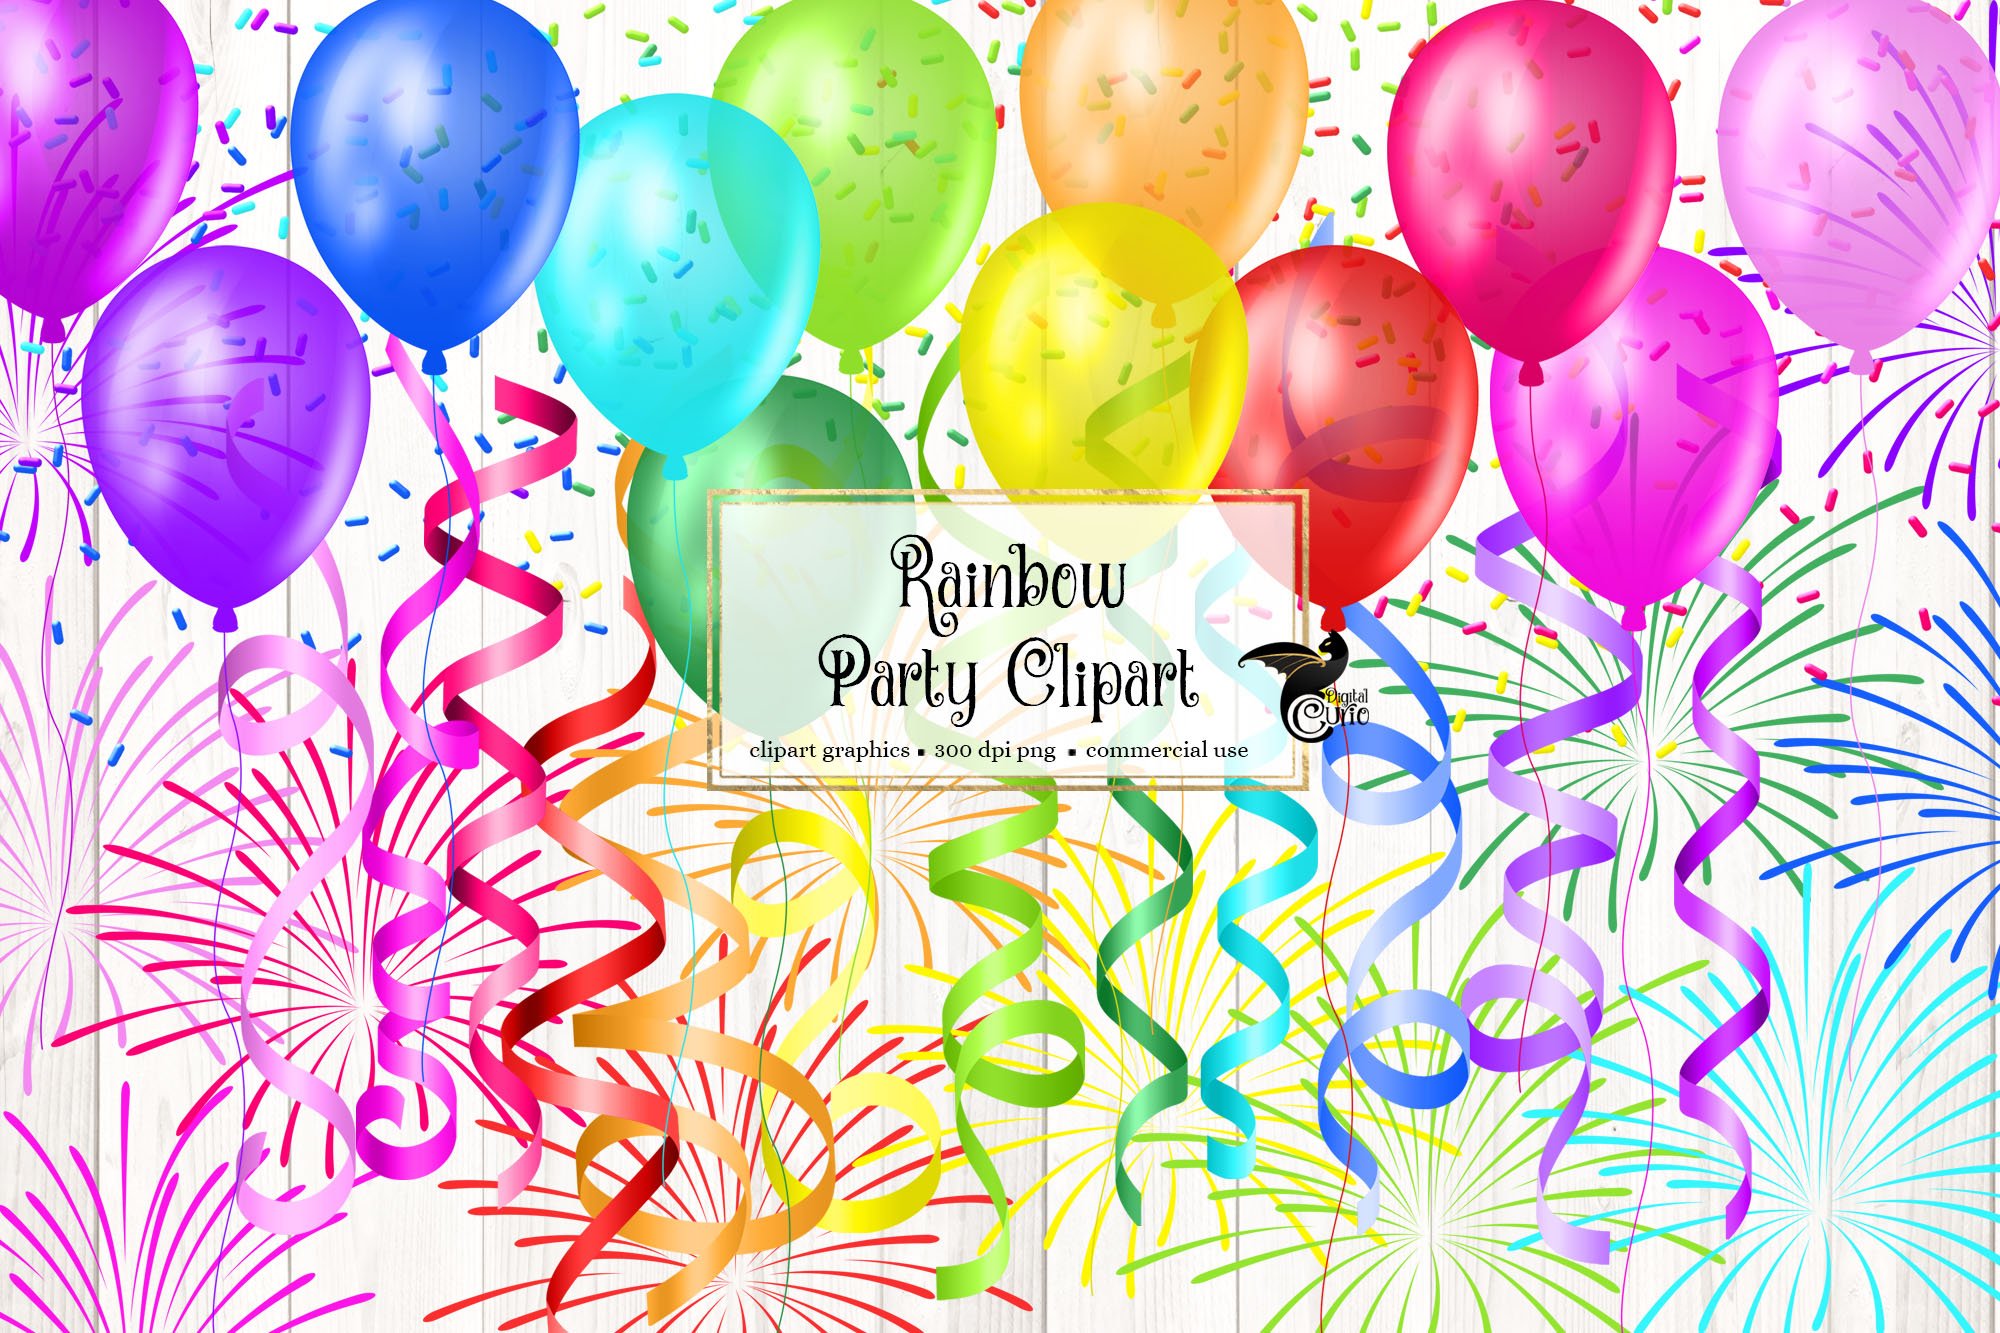 Rainbow Party Clip Art cover image.